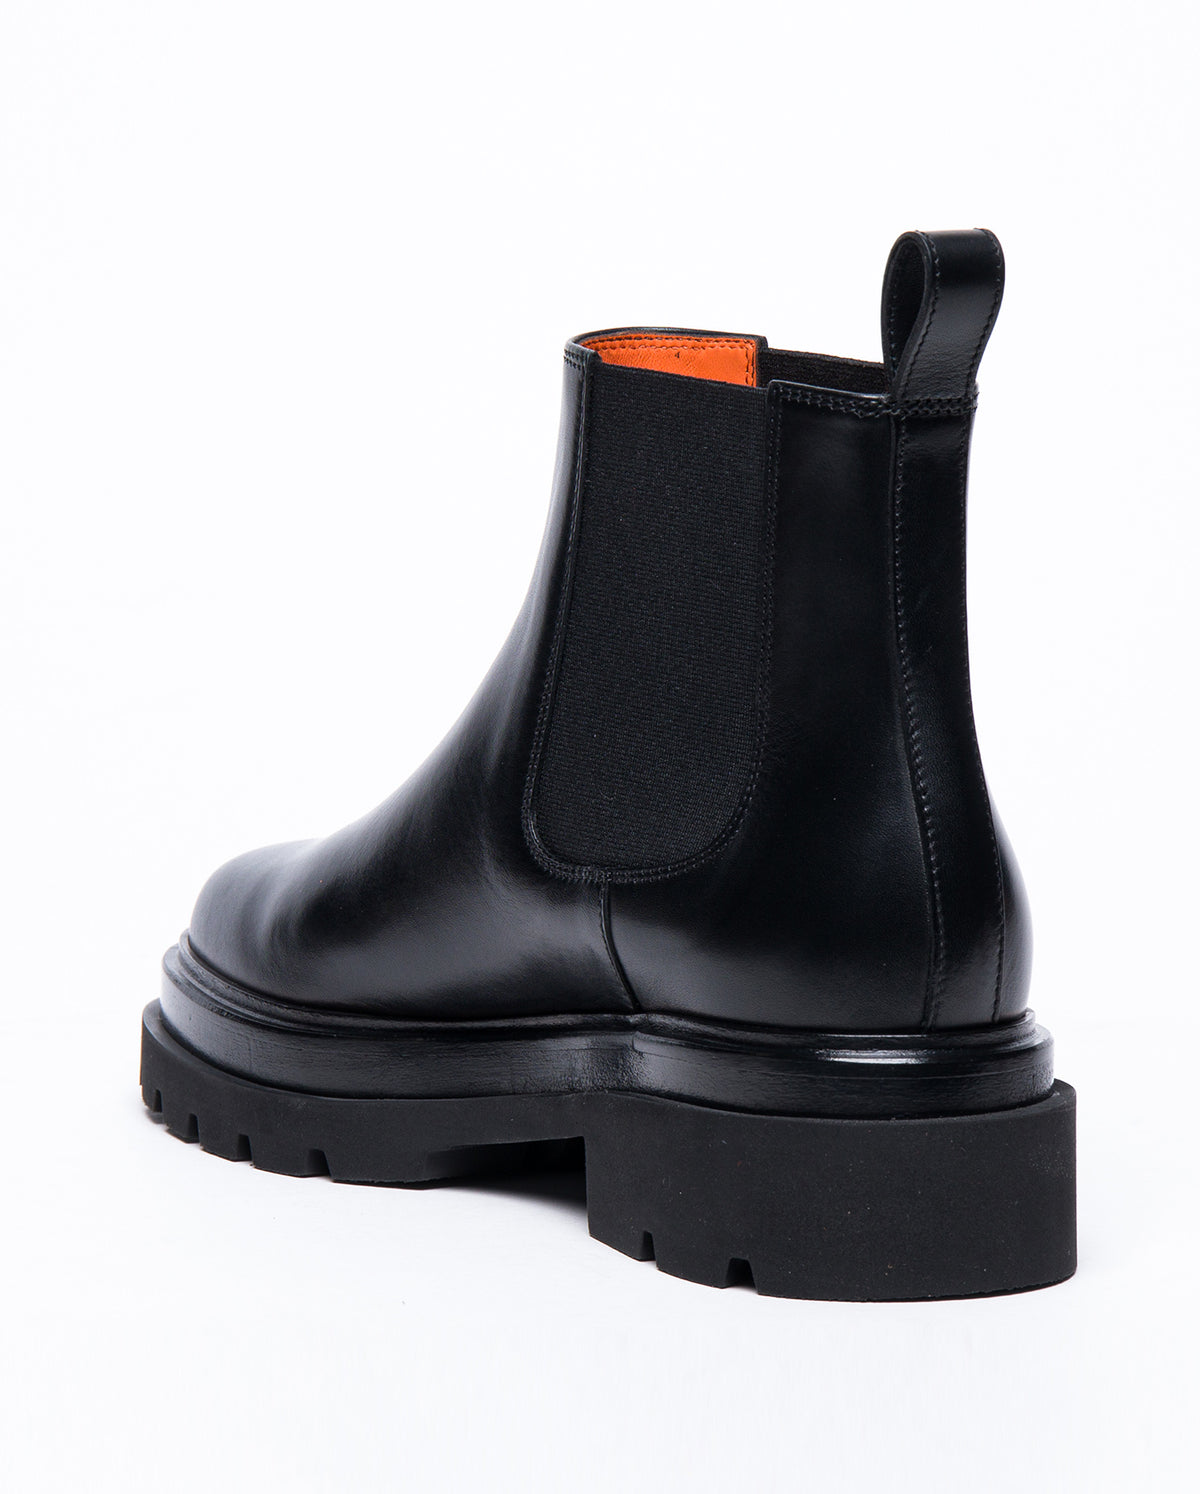 Rubber Ankle Boot - Black